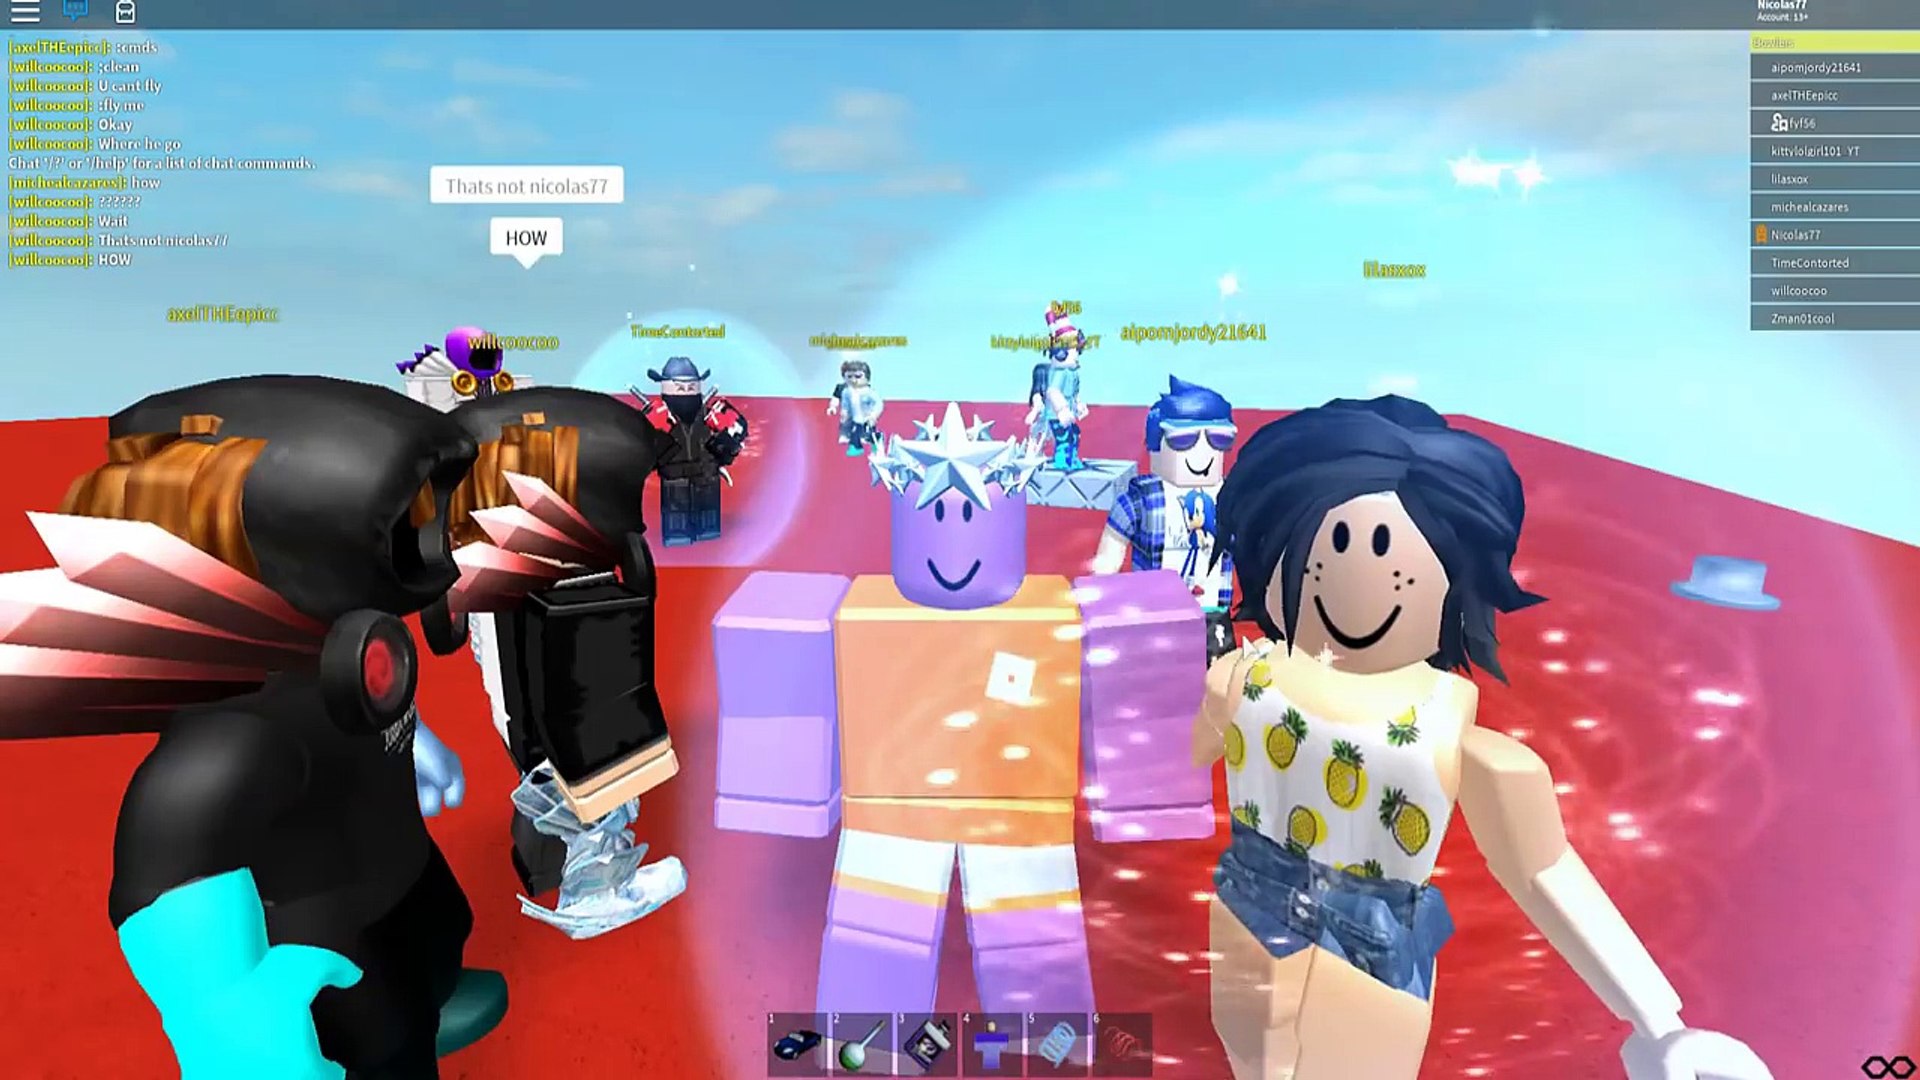 I Gave A Noob 10 000 Robux Then This Happened Roblox Dailymotion Video - roblox adventures stealing robux from random players cash grab simulator video dailymotion